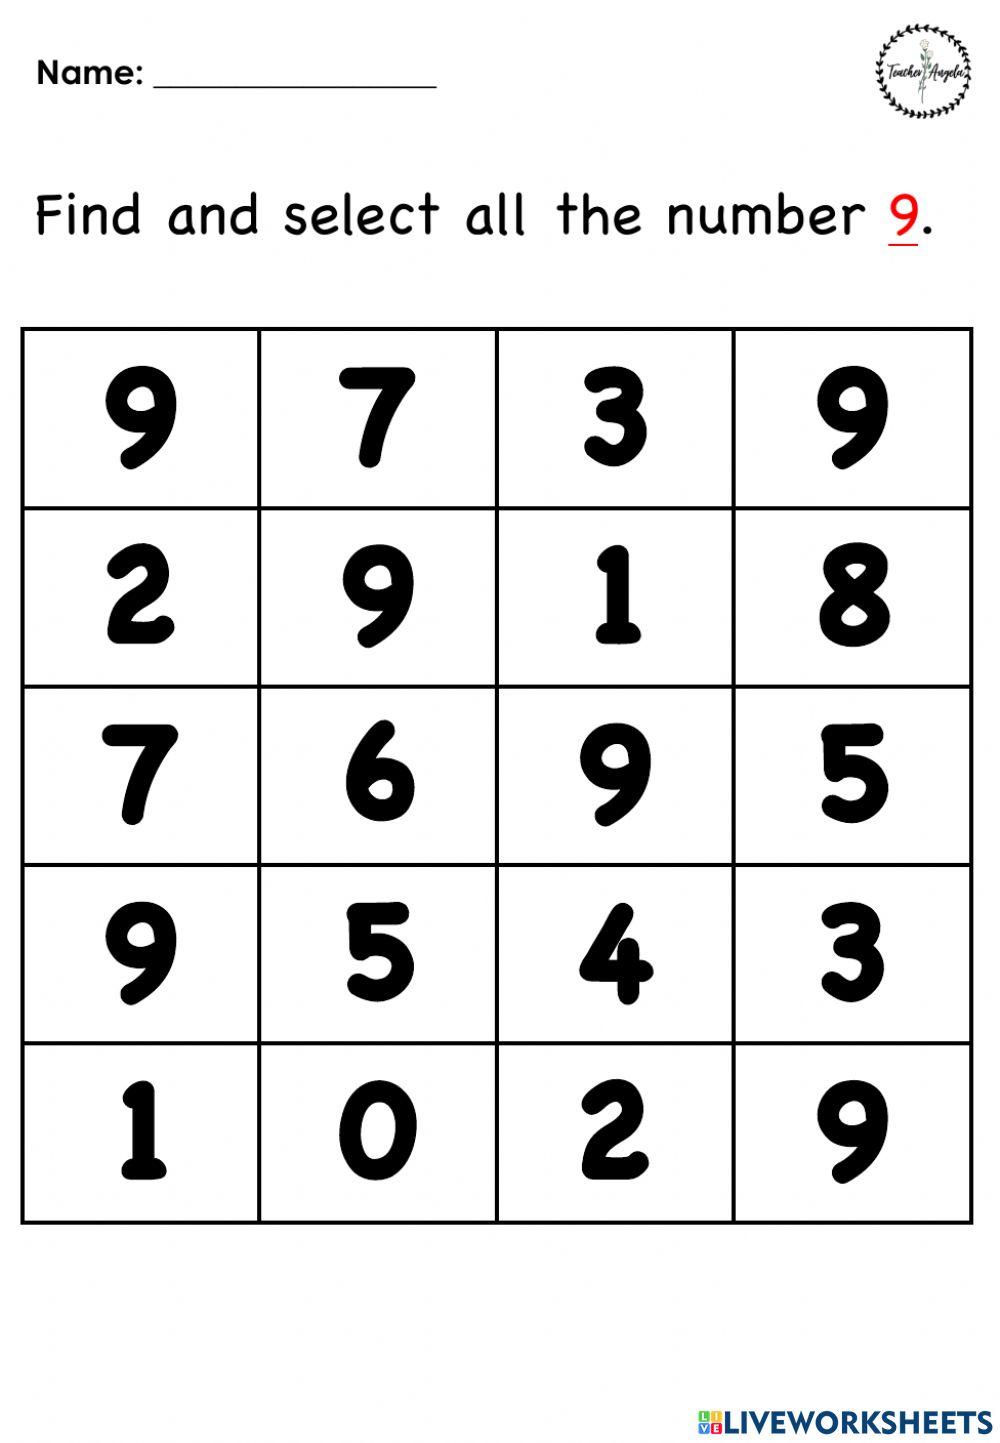 Find the number 9